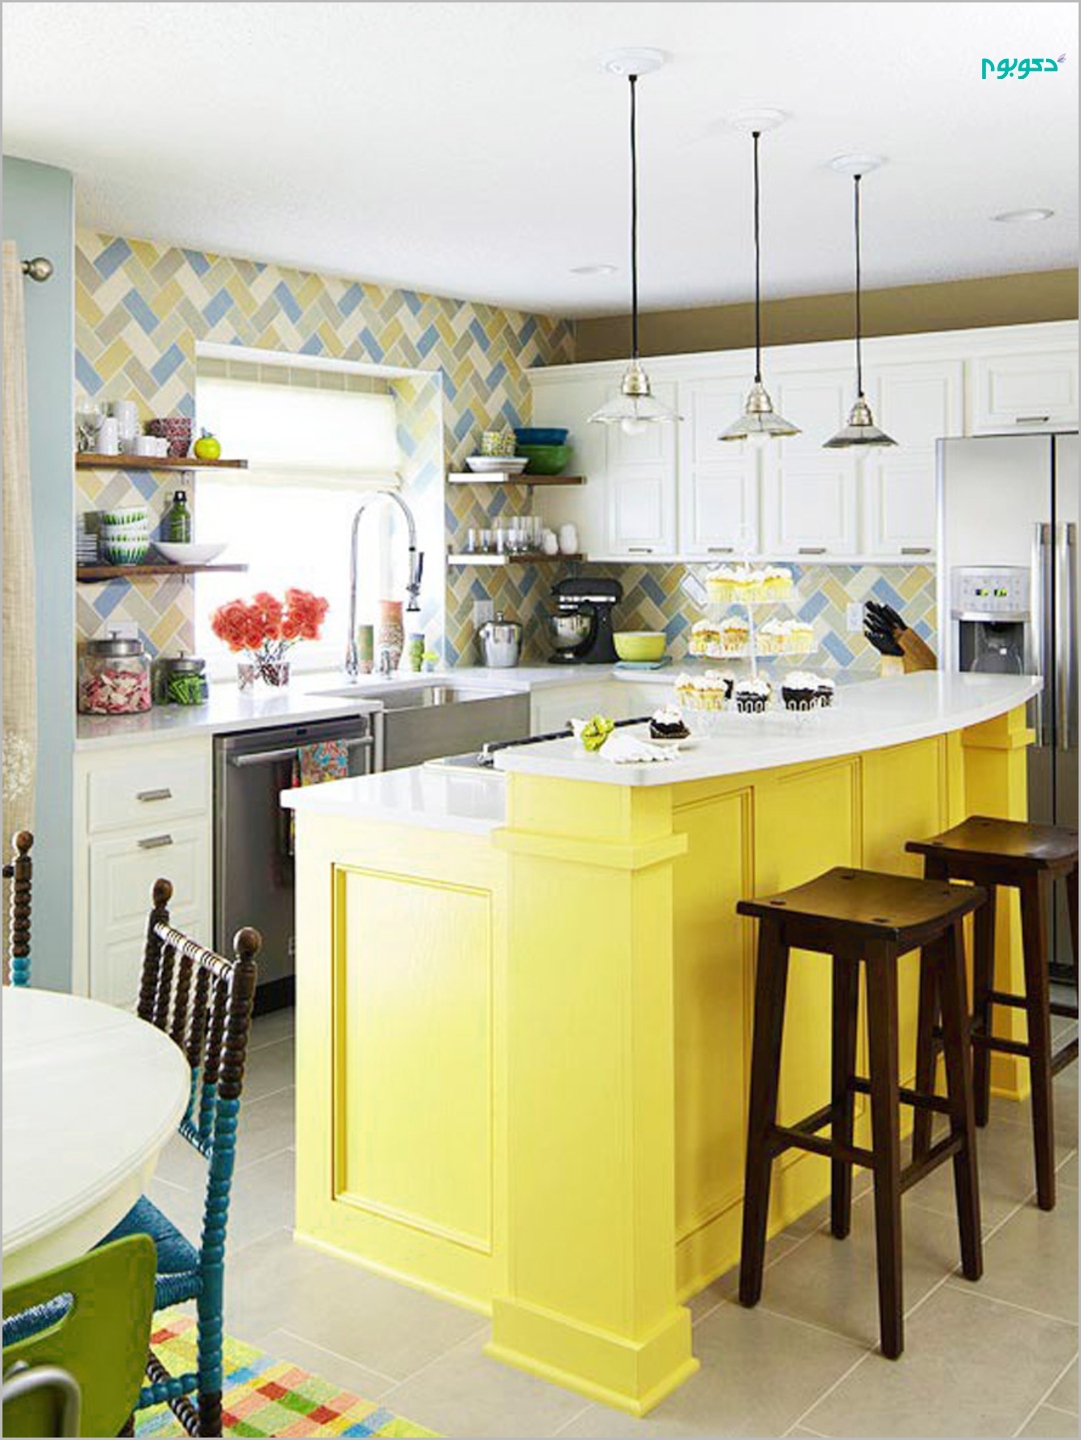 36-canary-in-a-cage-kitchen-design-homebnc.jpg